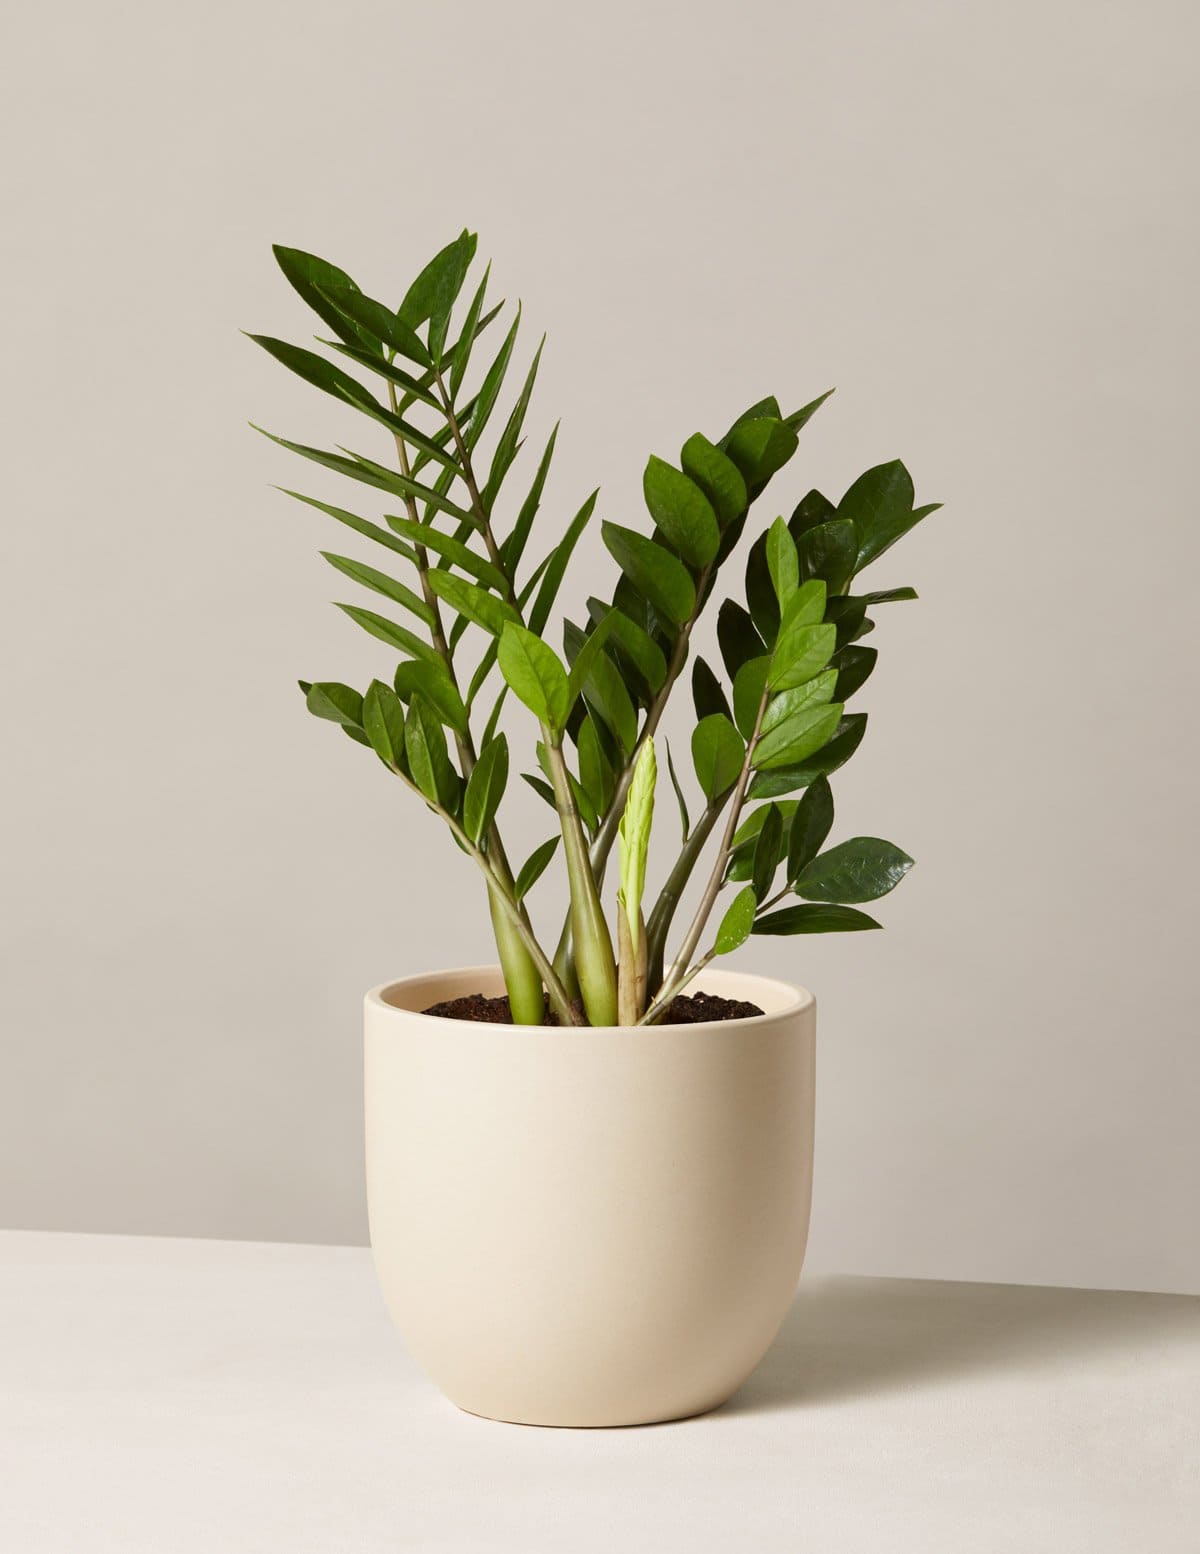 6 houseplants that can increase your well-being - 45